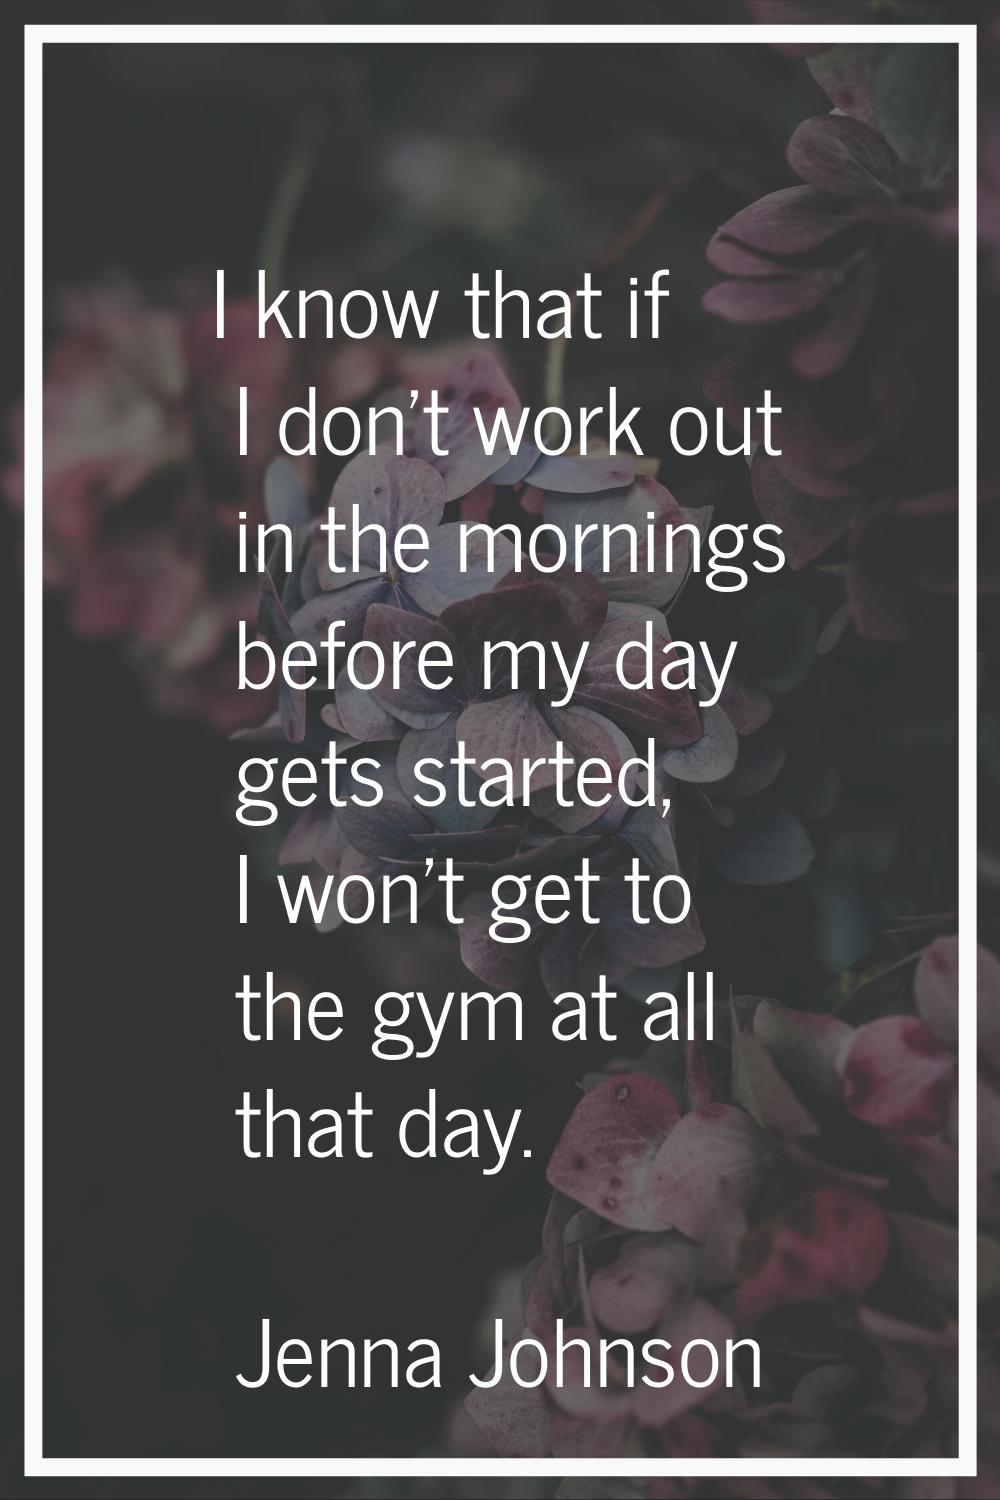 I know that if I don’t work out in the mornings before my day gets started, I won’t get to the gym 